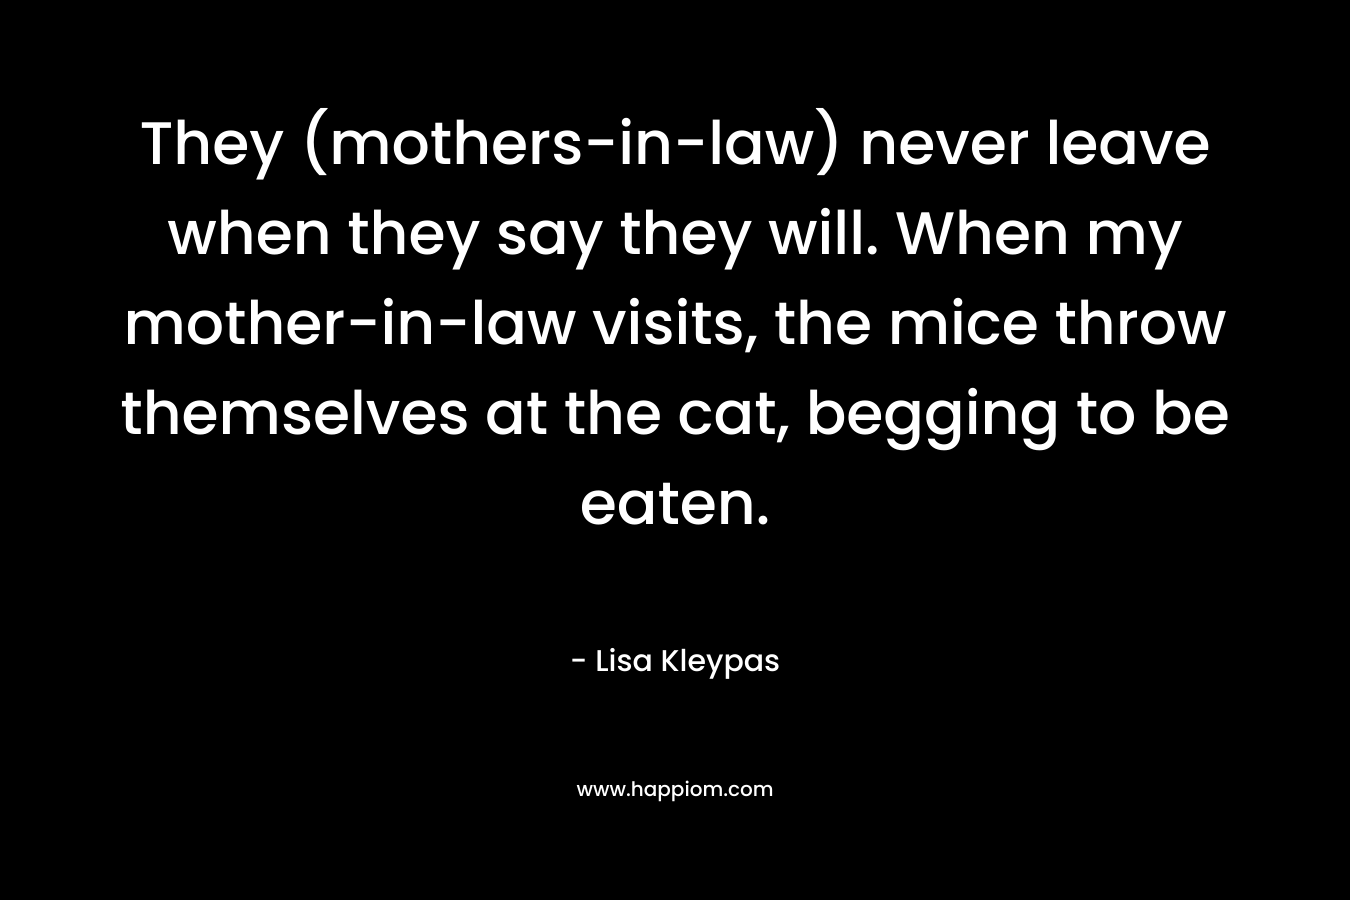 They (mothers-in-law) never leave when they say they will. When my mother-in-law visits, the mice throw themselves at the cat, begging to be eaten. – Lisa Kleypas